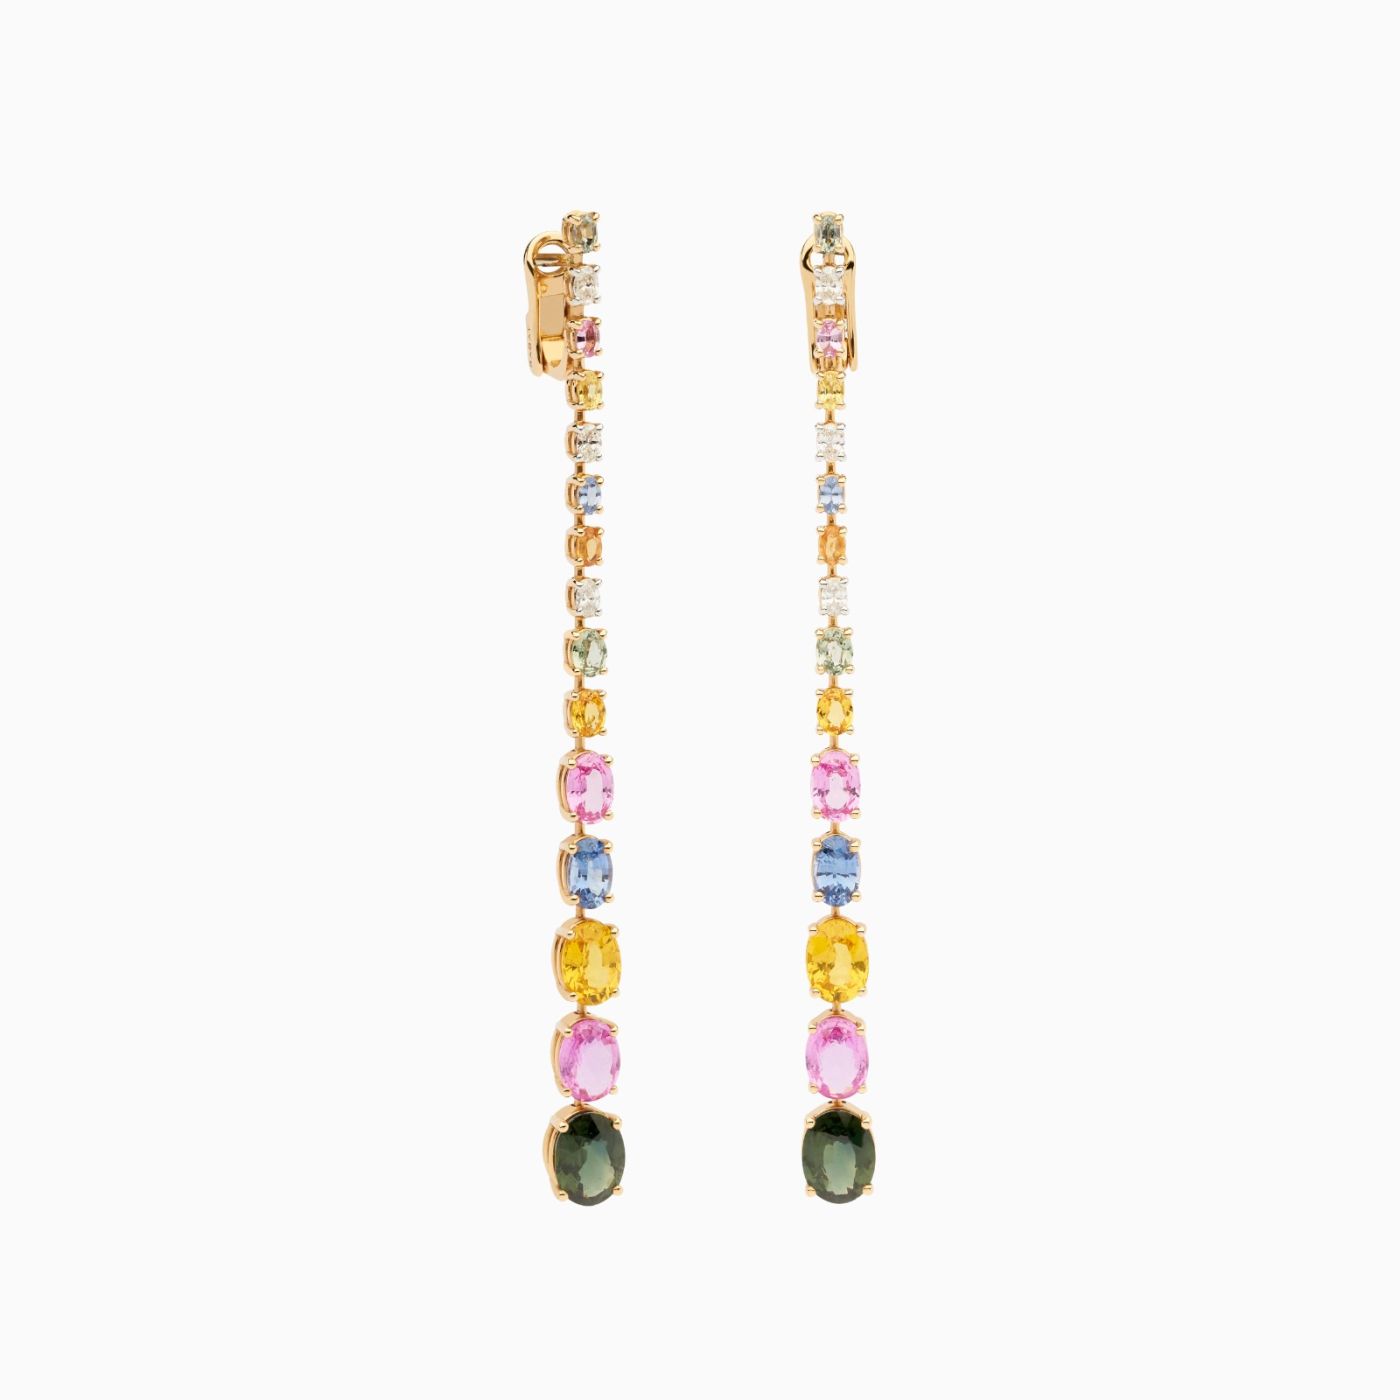 Long earrings in rose gold with multicoloured sapphires and diamonds